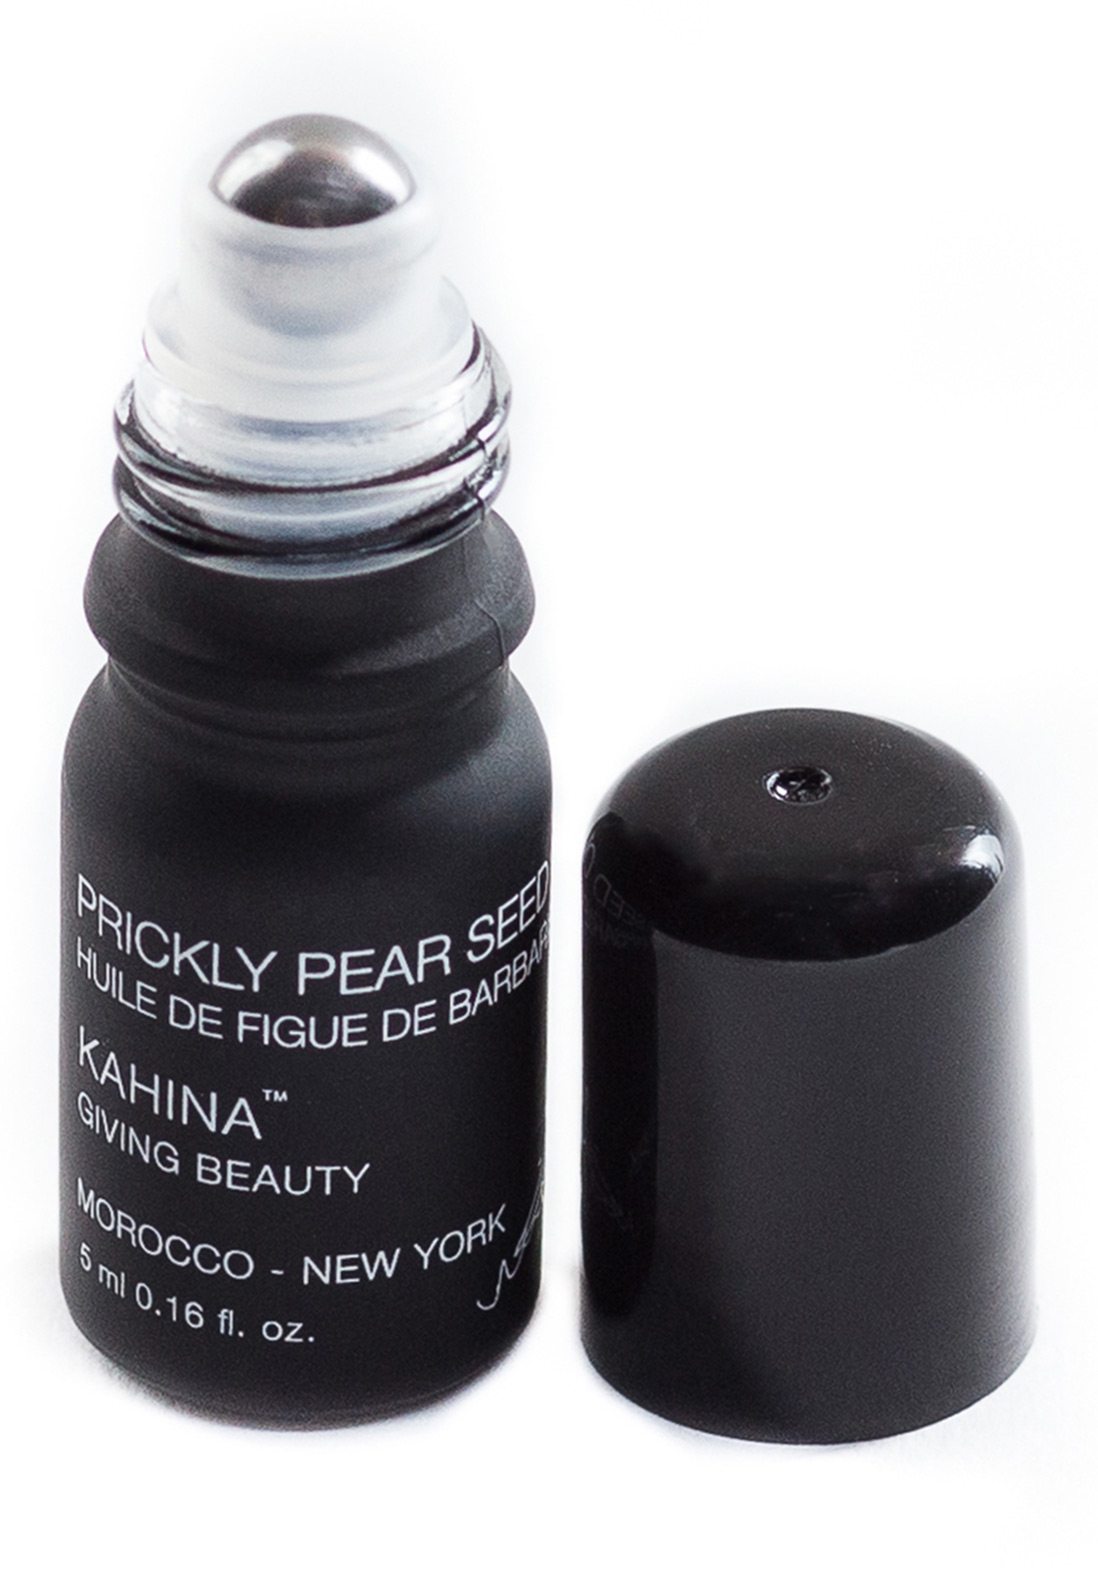 Kahina Giving Beauty - Prickly Pear Seed Oil Roll On